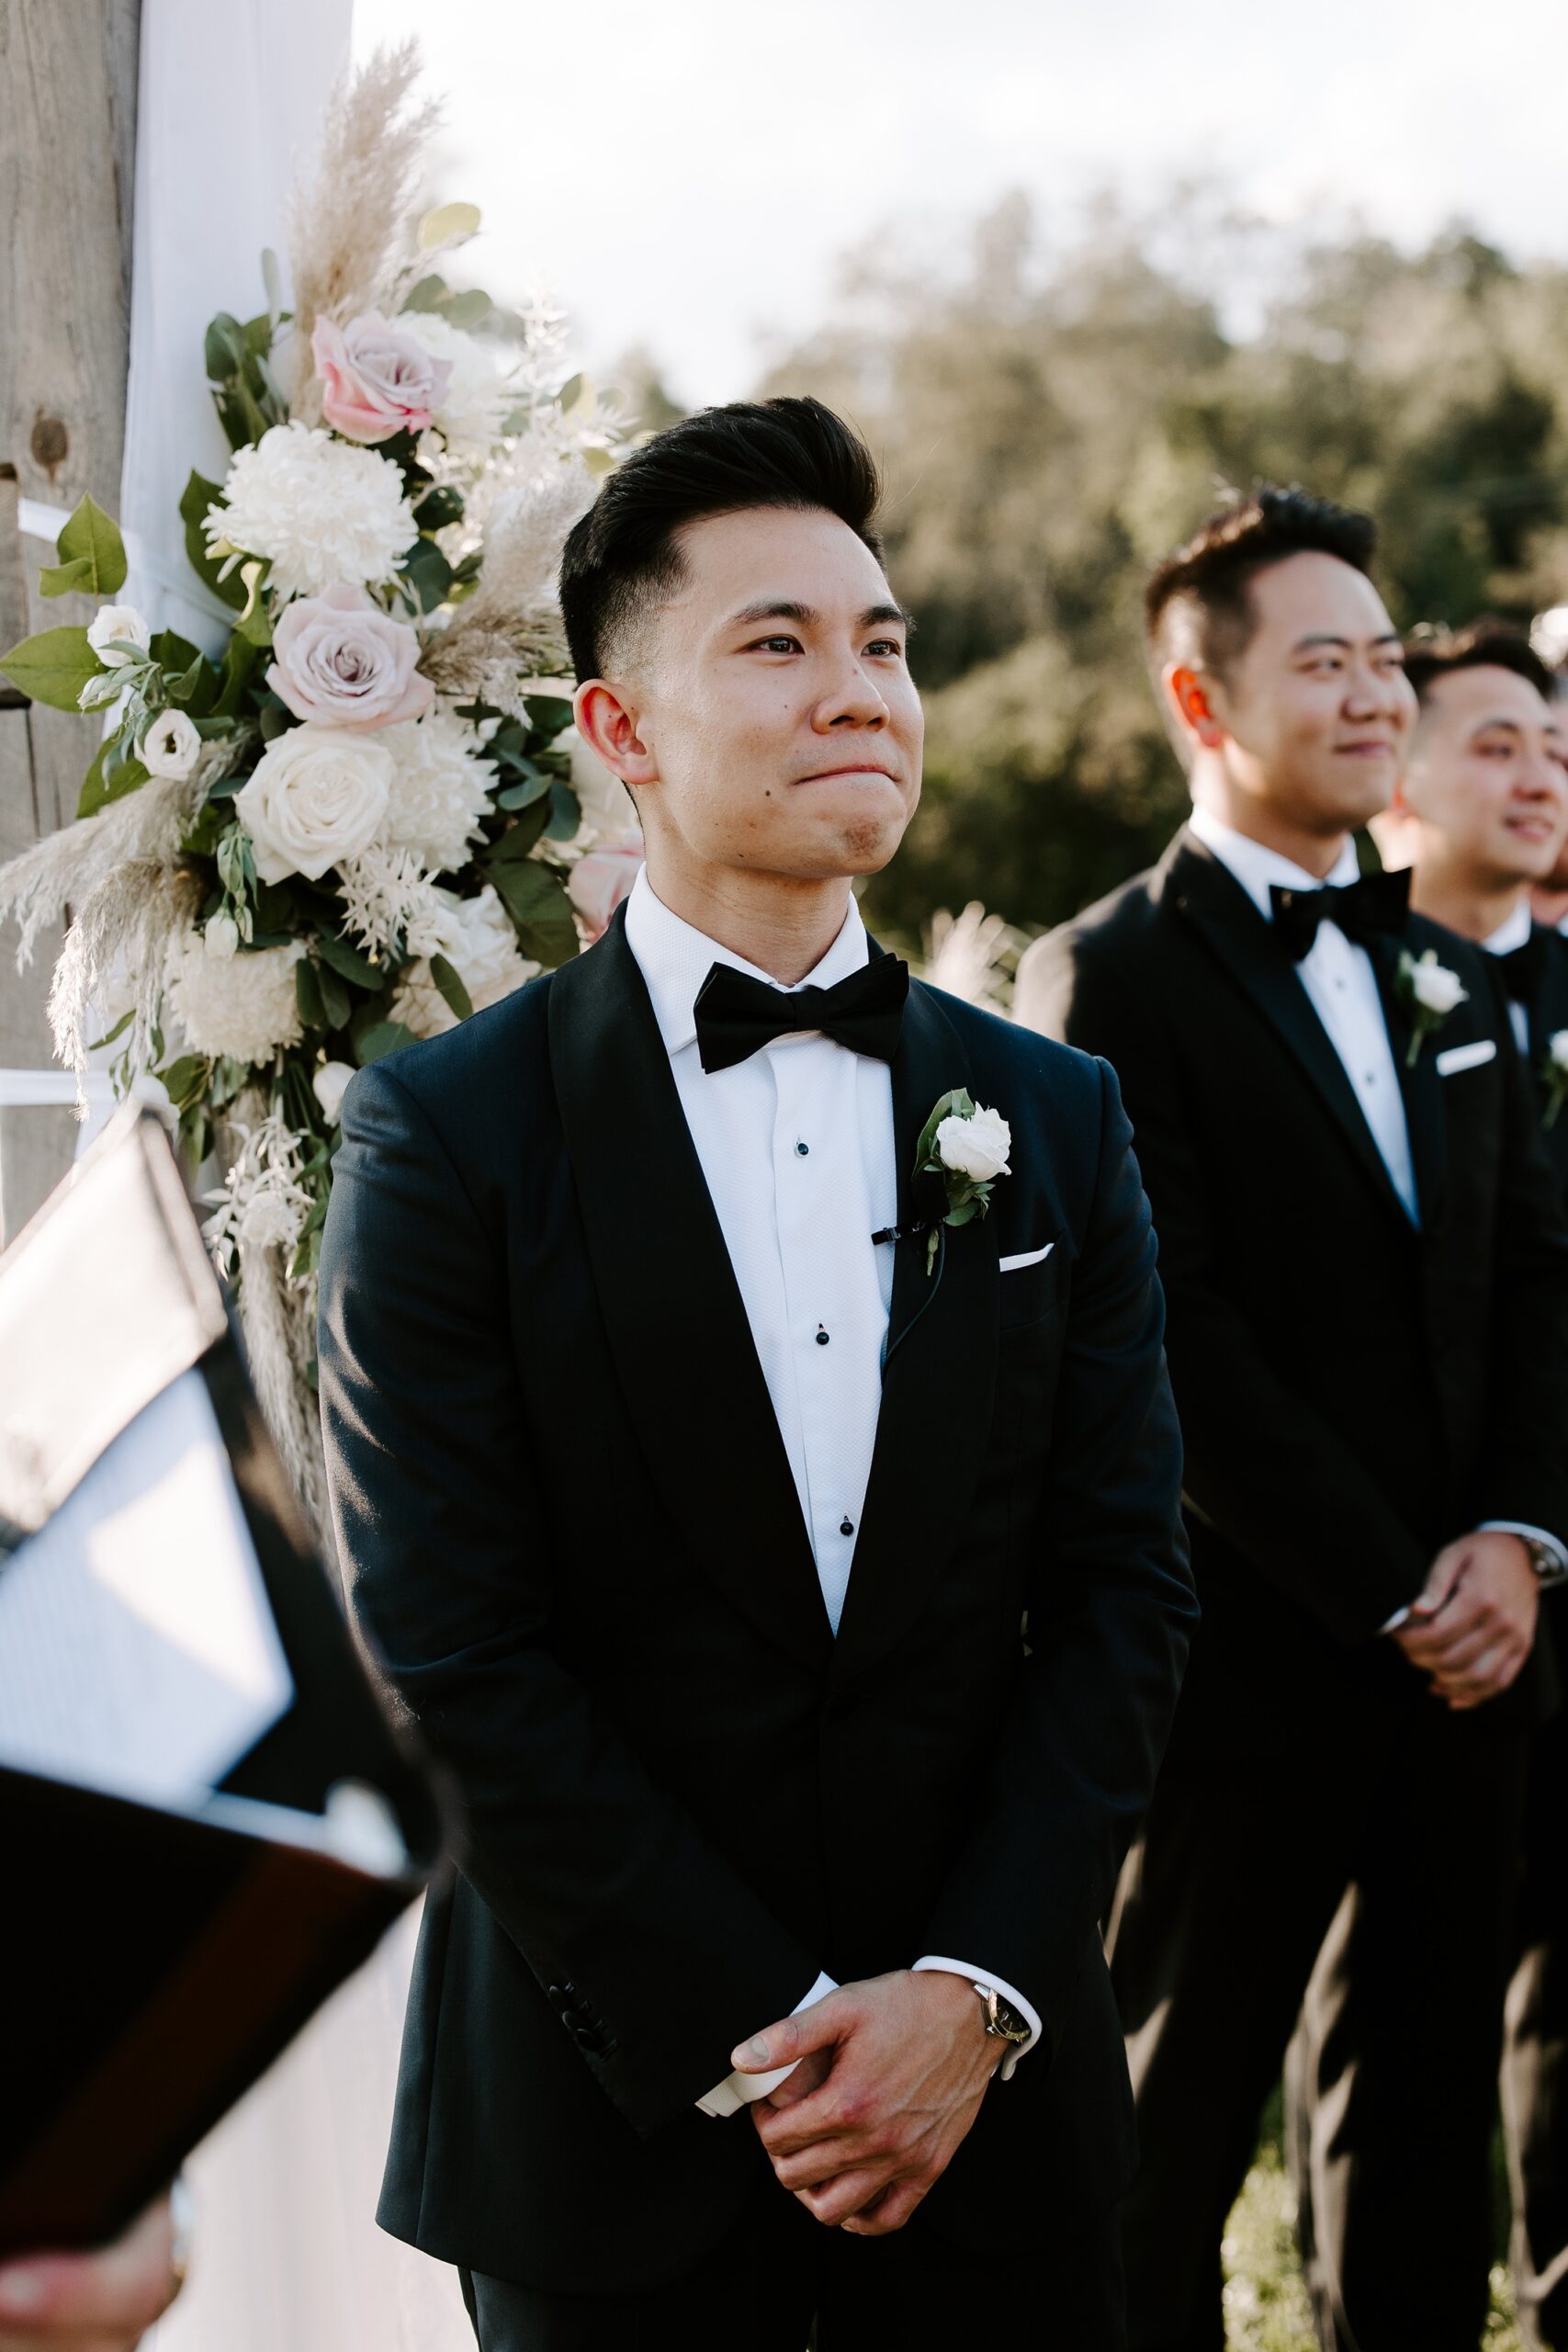 Groom reacts to bride walking down the aisle